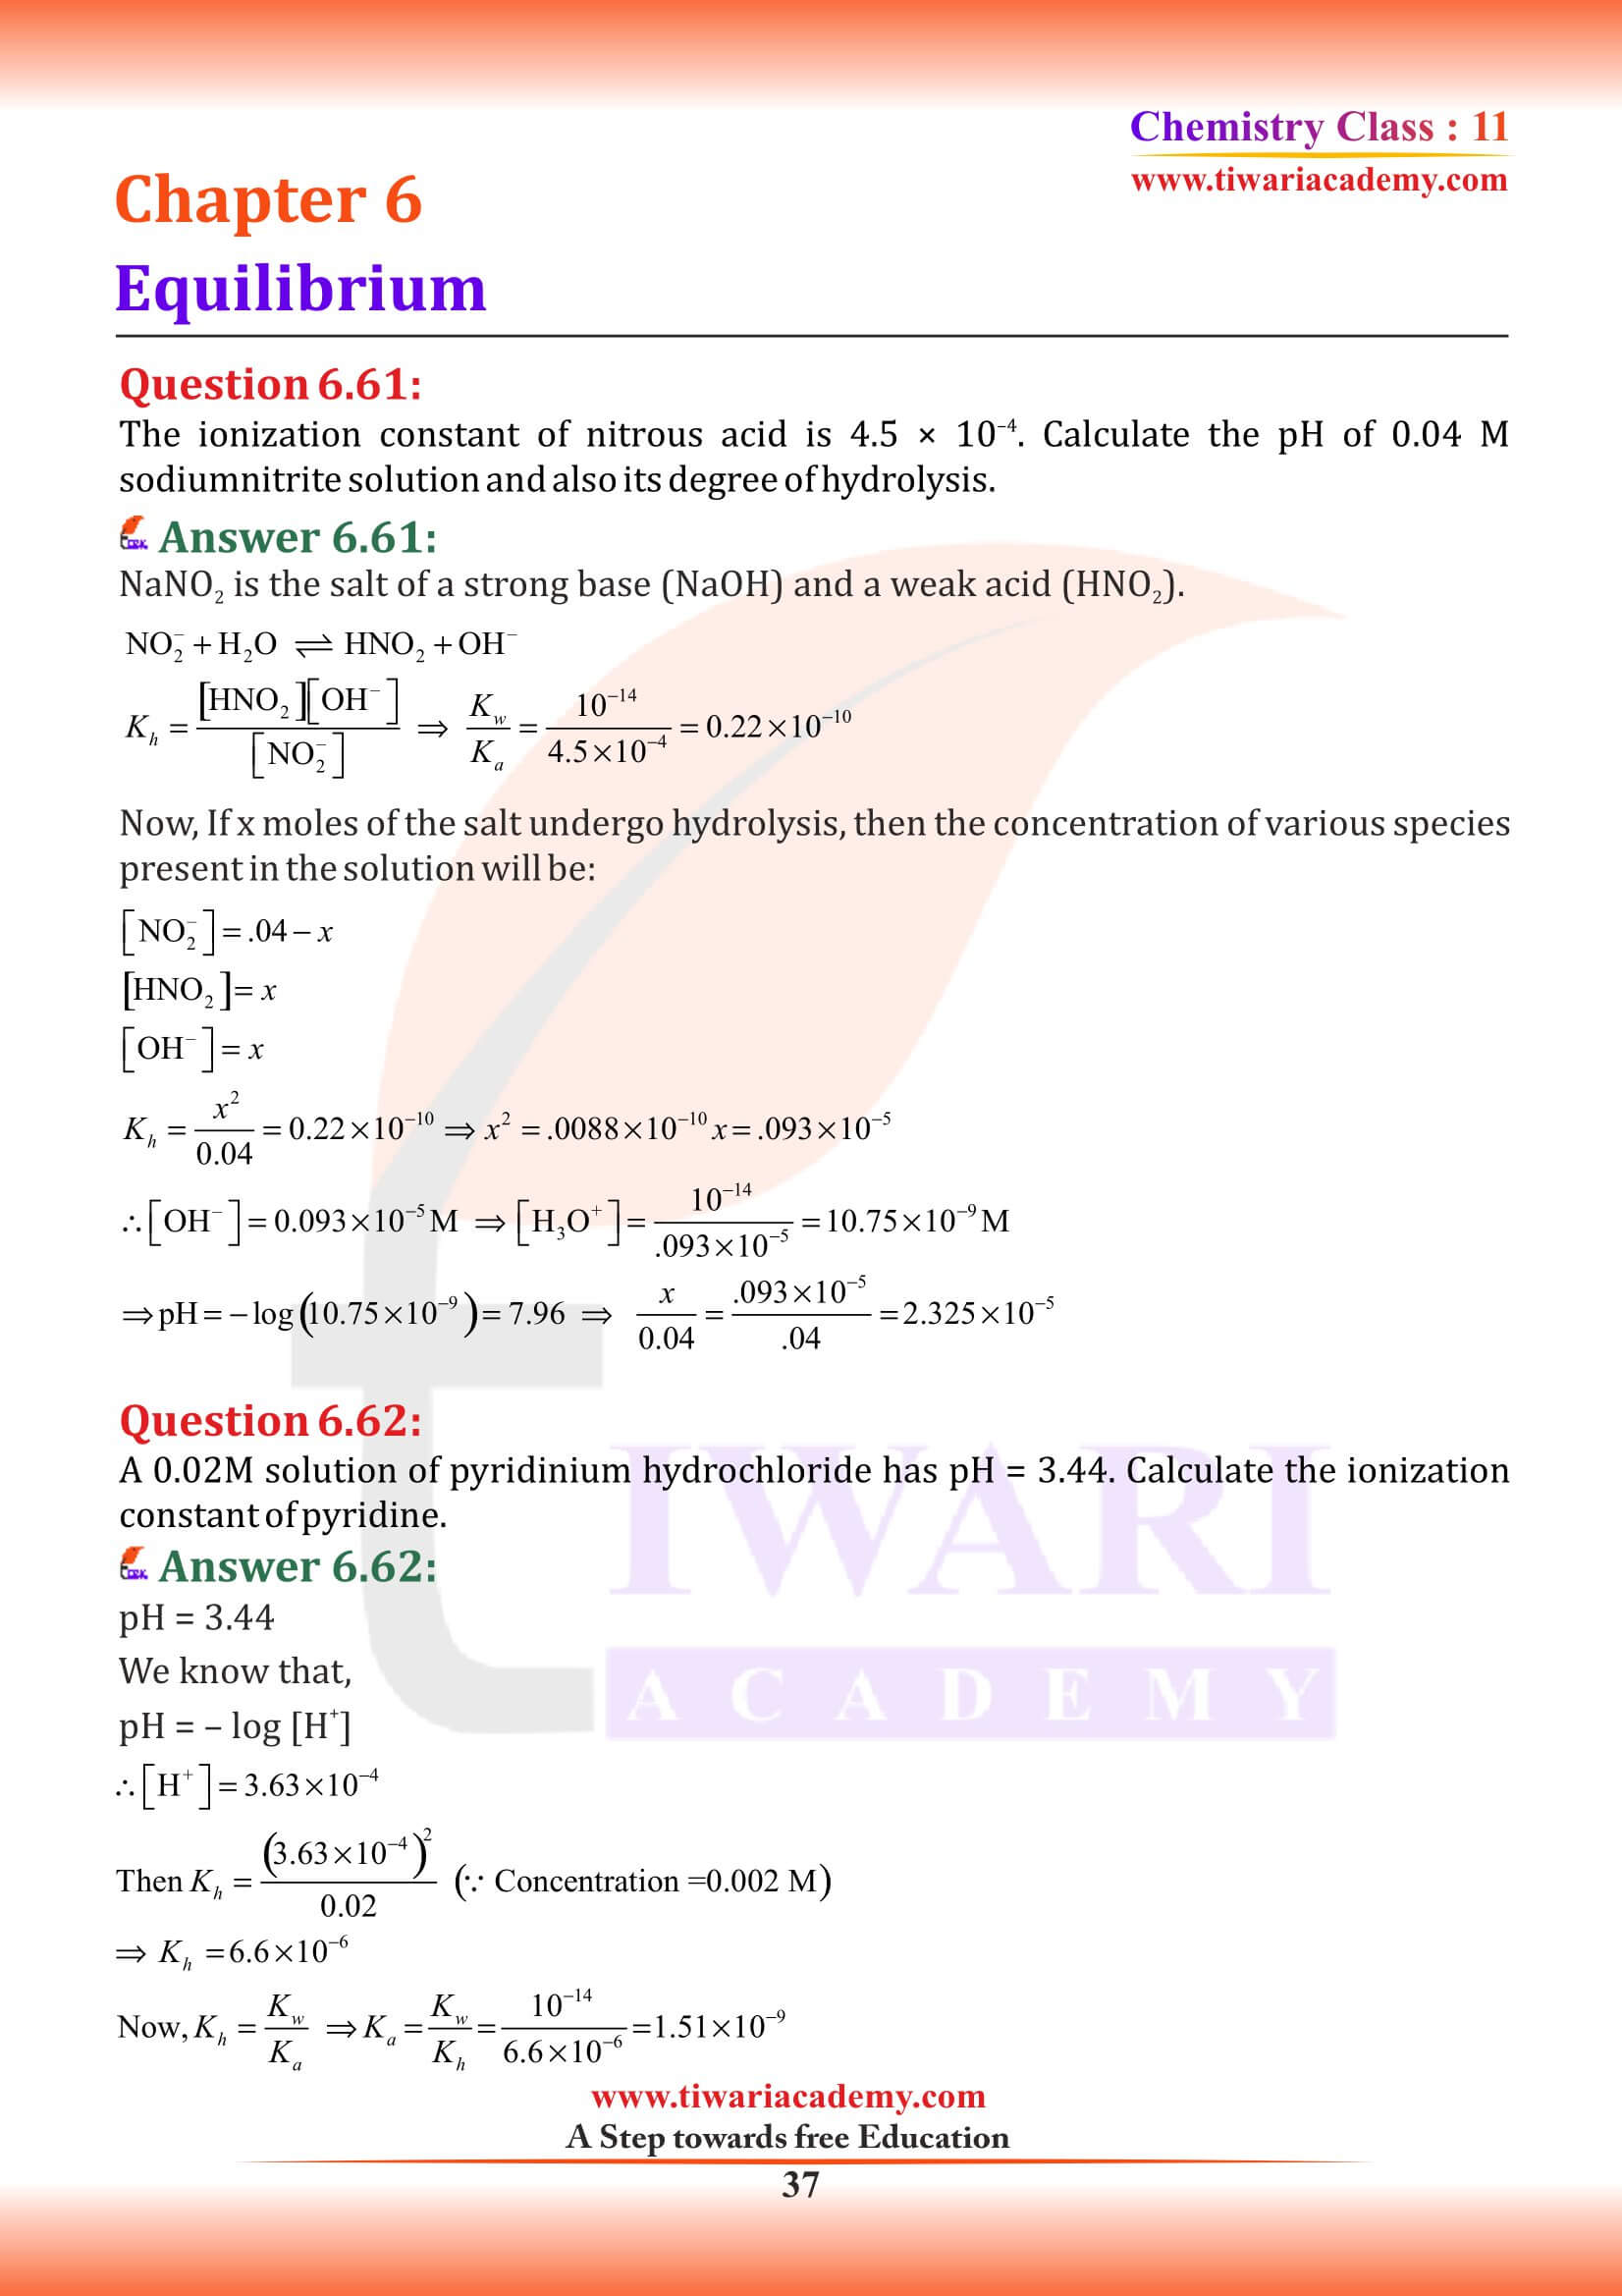 NCERT Class 11 Chem Chapter 6 Answers